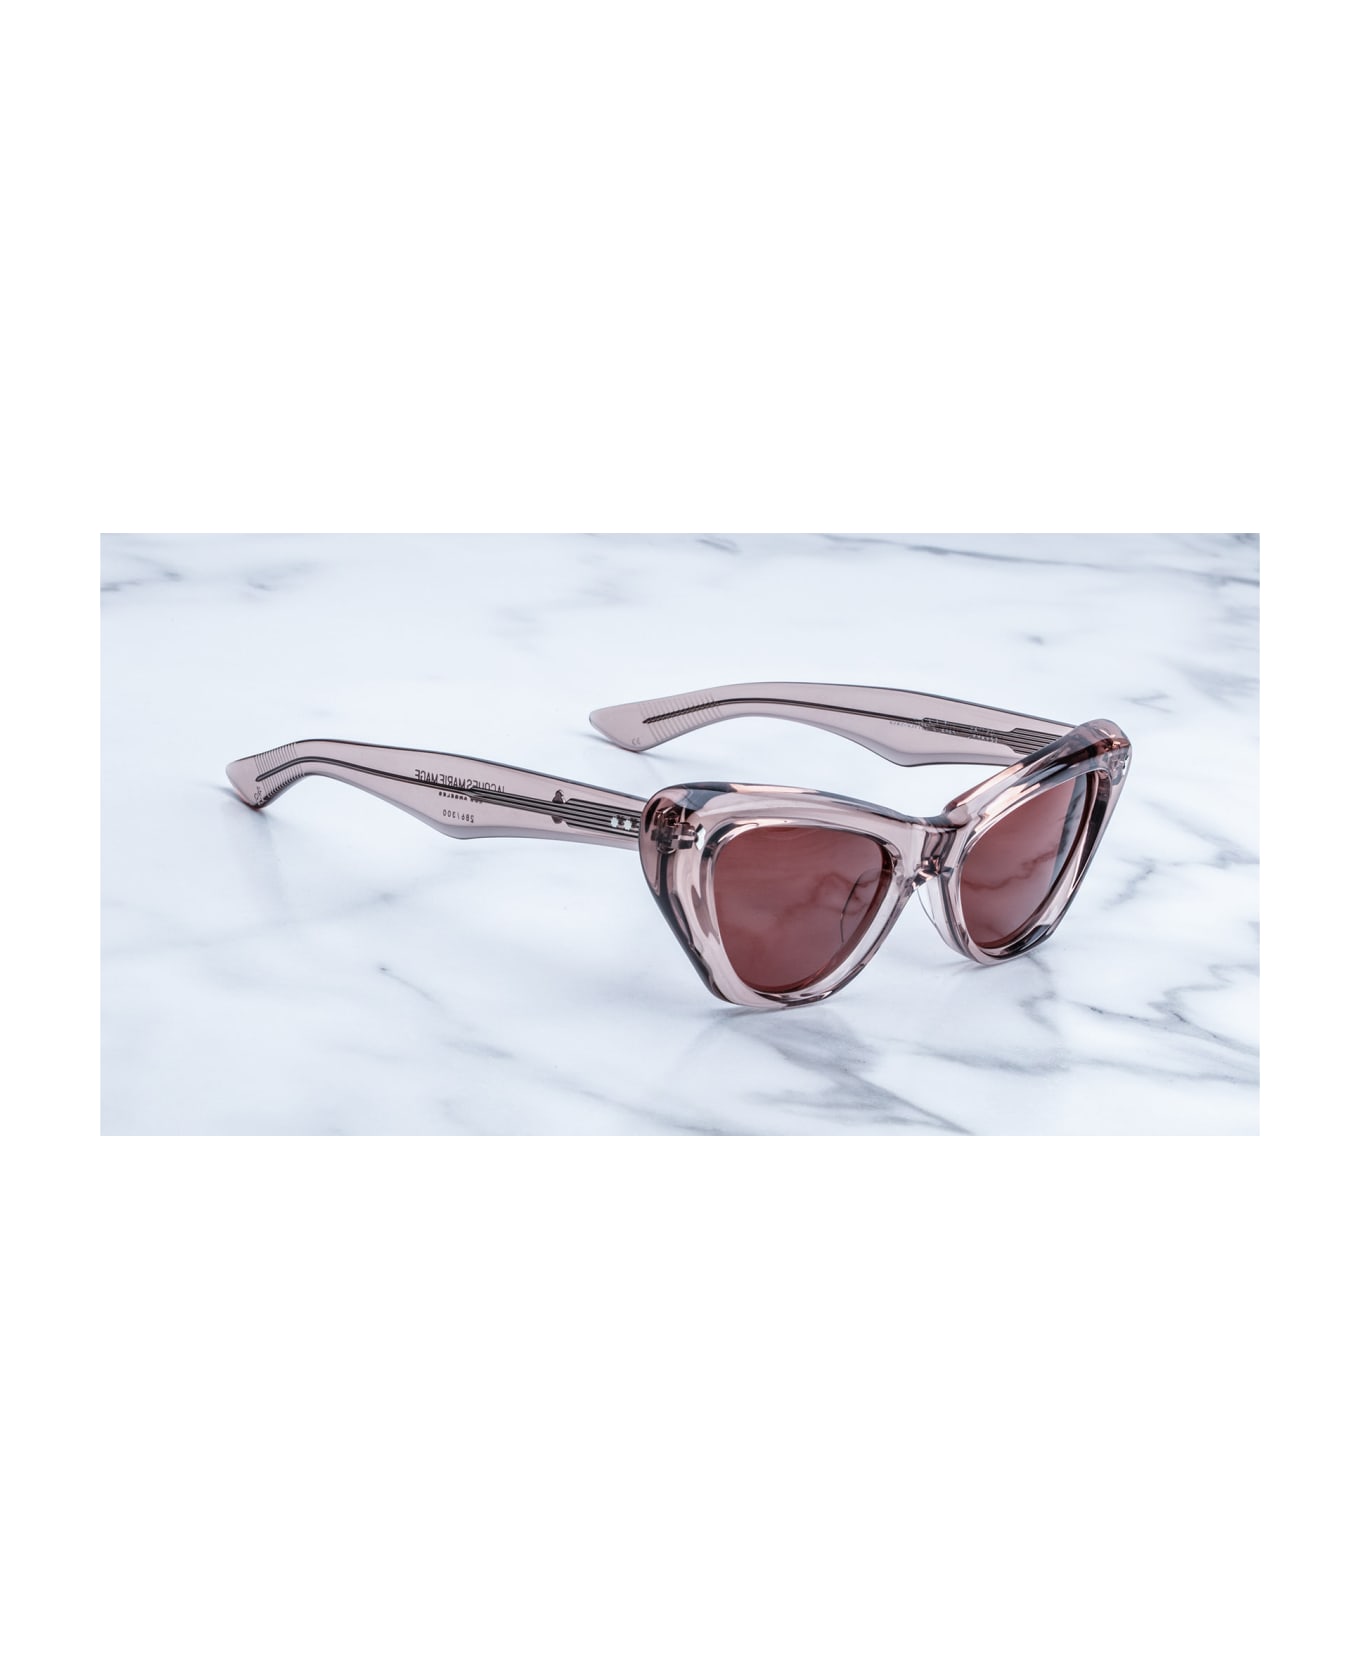 Jacques Marie Mage Kelly - Heather Sunglasses - Clear Pink